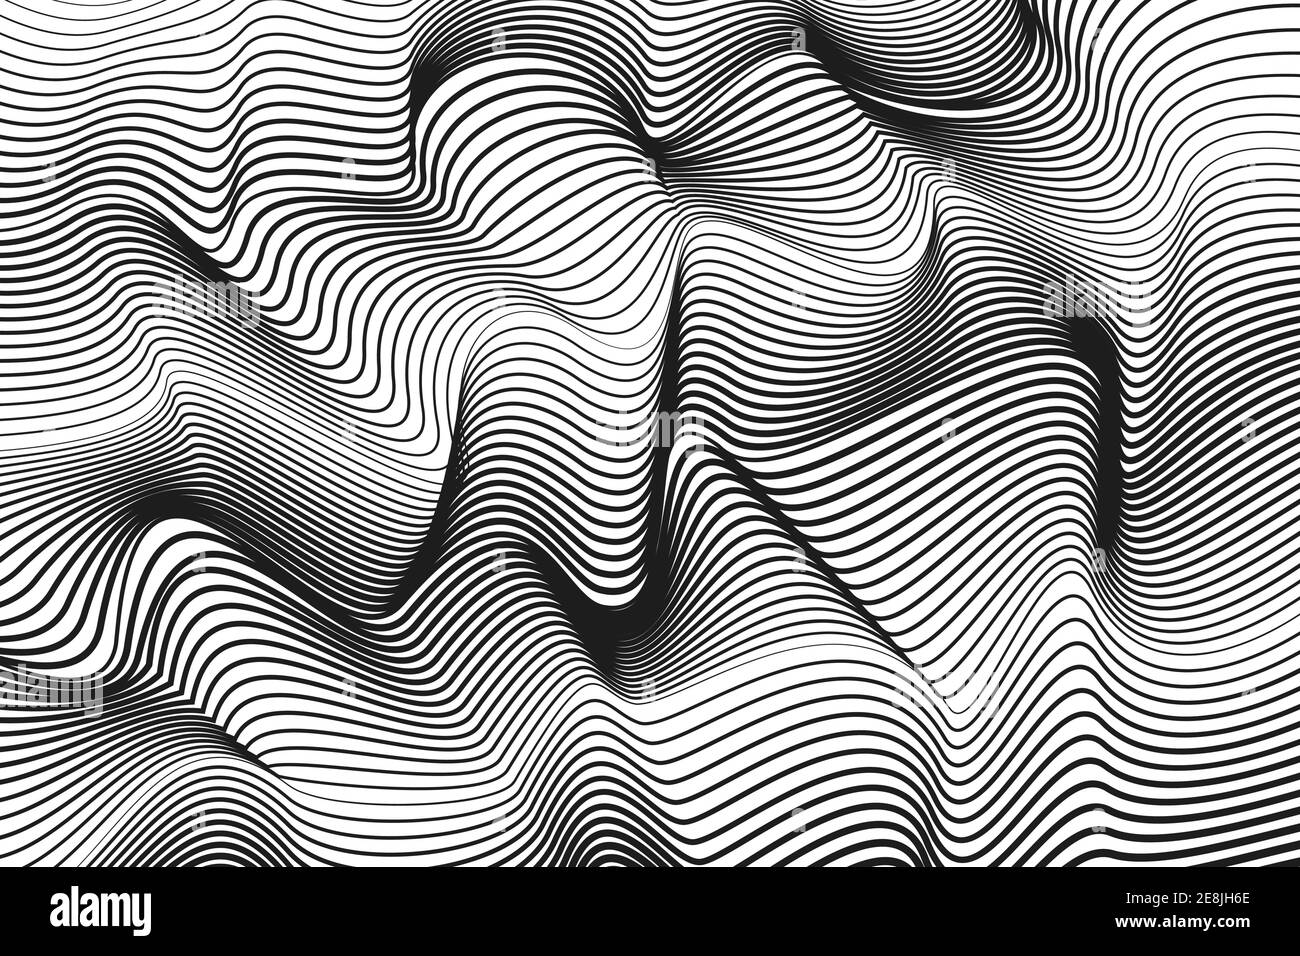 Black and white striped pattern. Flowing bw curves. Abstract squiggly lines. Vector op art design. Radio, sound wave. Monochrome background. EPS10 Stock Vector